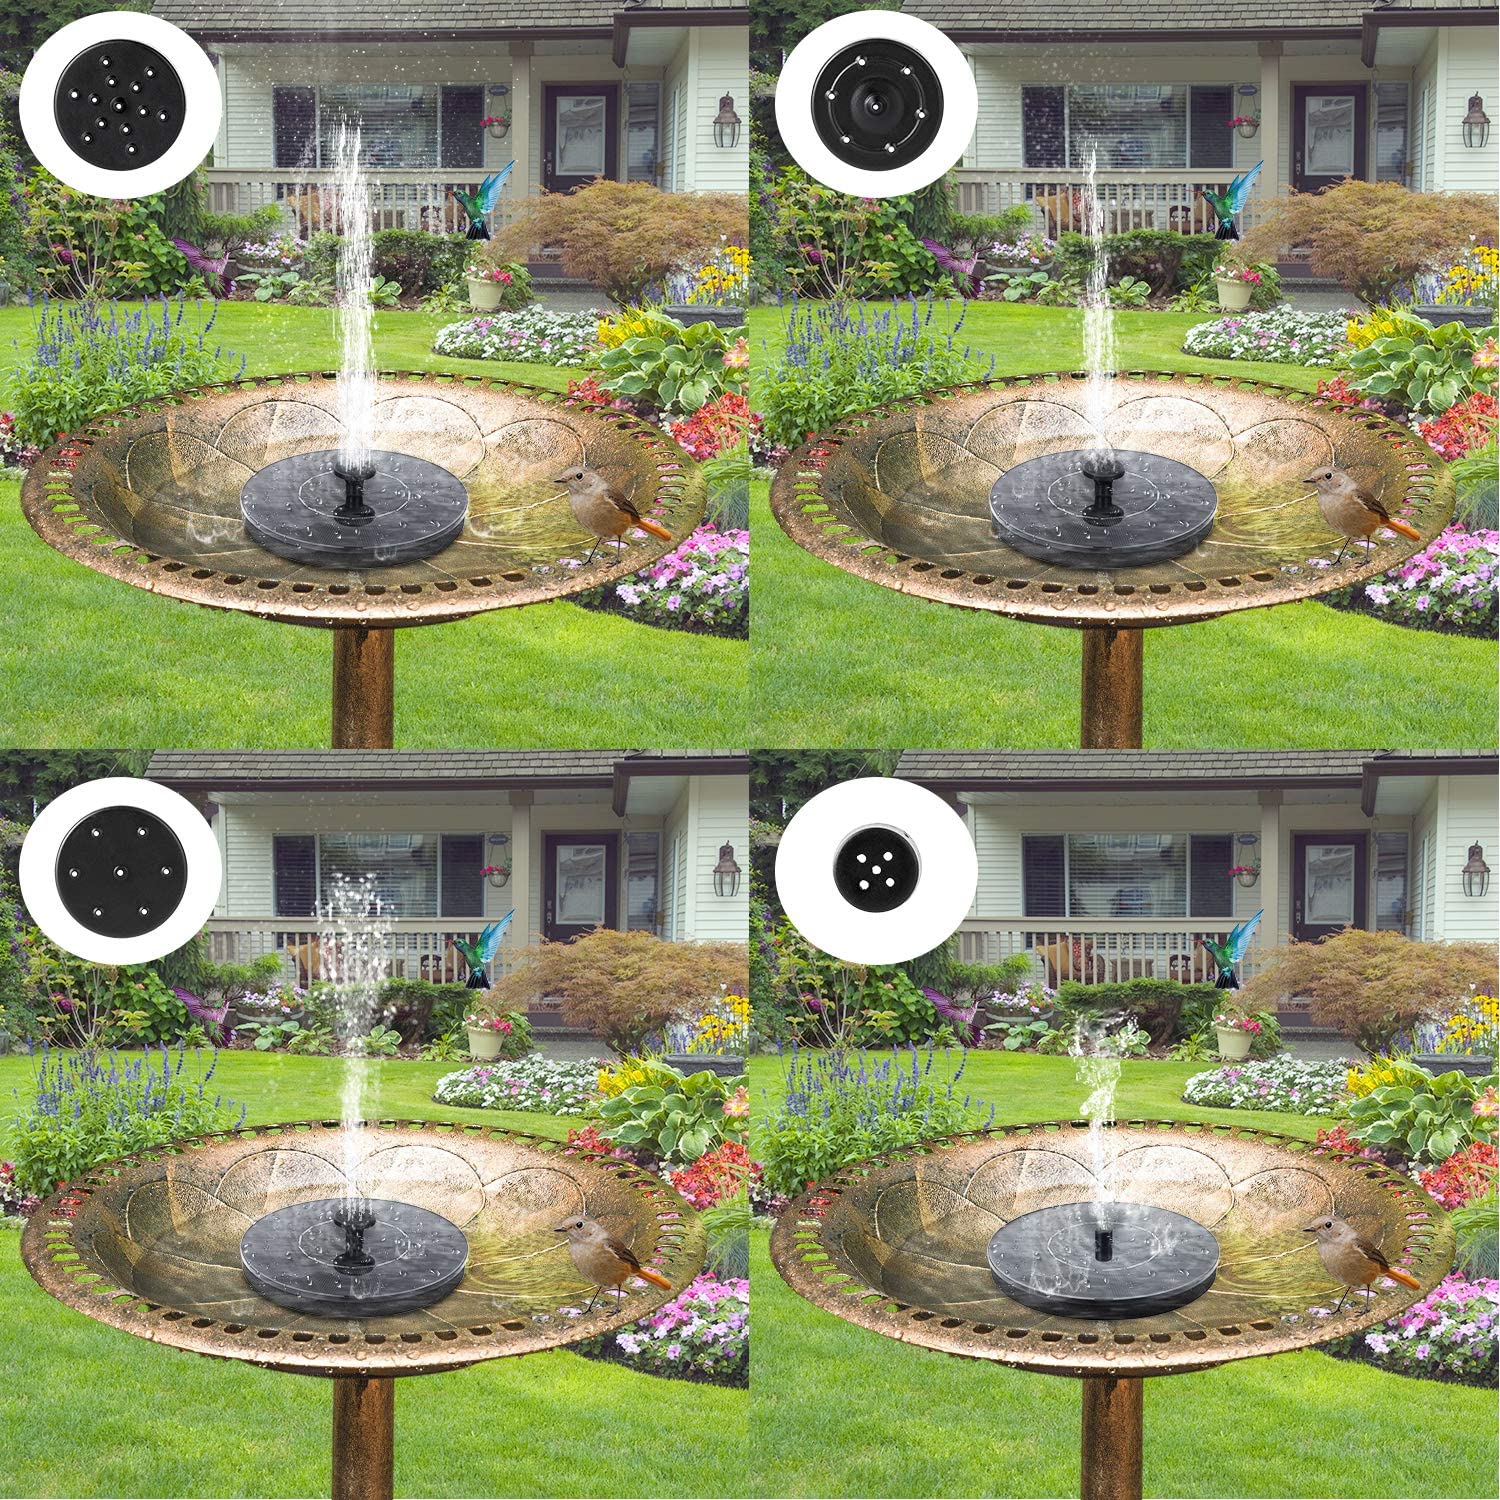 Floating Solar Fountain Solar Powered Fountain Pump for Standing Floating Birdbath Water Pumps for Garden Patio Pond Pool